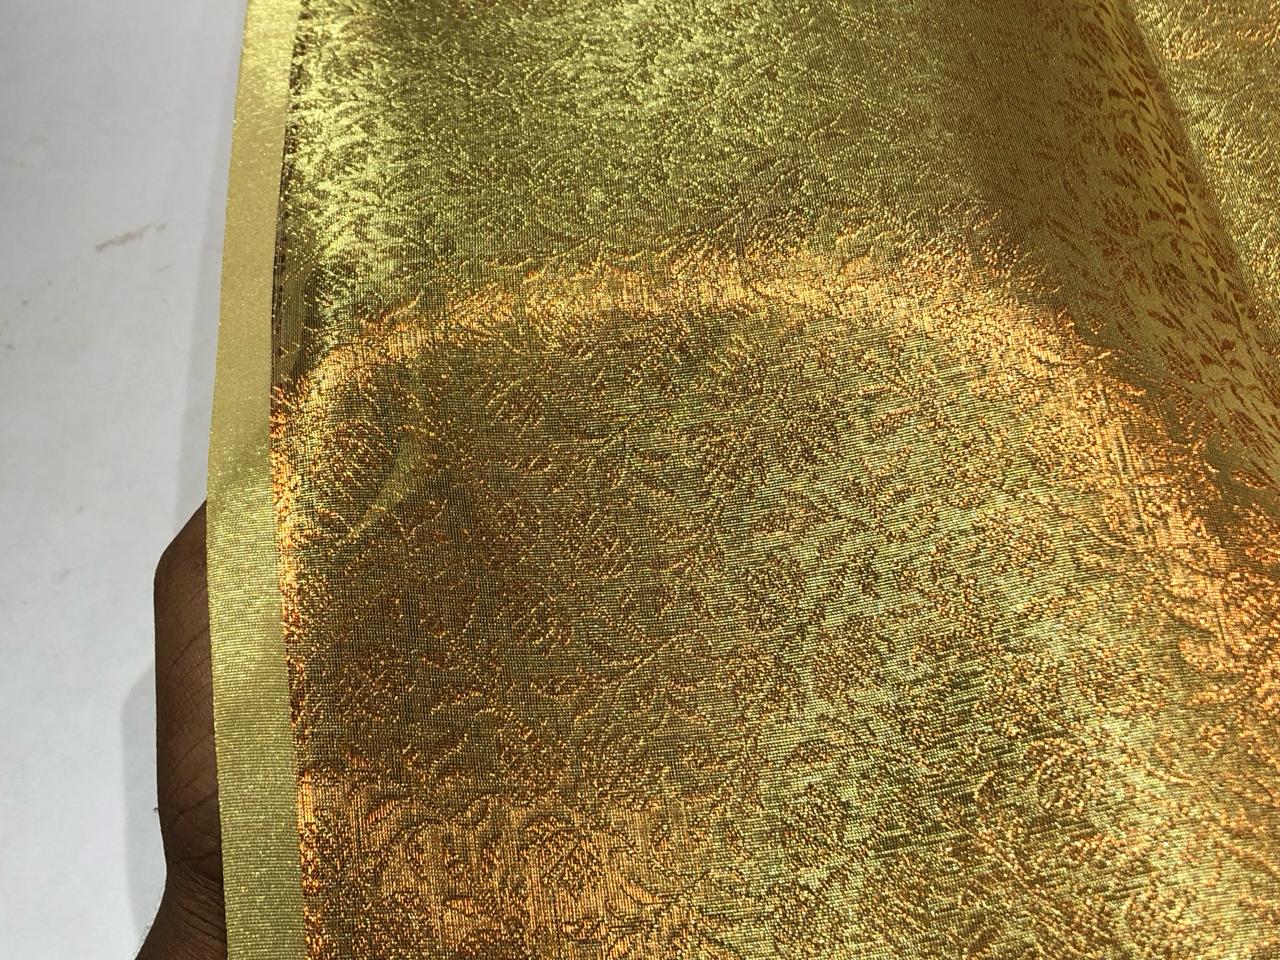 BROCADE Tissue Jacquard available in 3 colors [BRO925[1] GOLD AND DEEP BRONZE BRO925[2] GOLD AND SUBTLE BRONZE BRO925[3] GOLDEN BEIGE AND BRONZE]